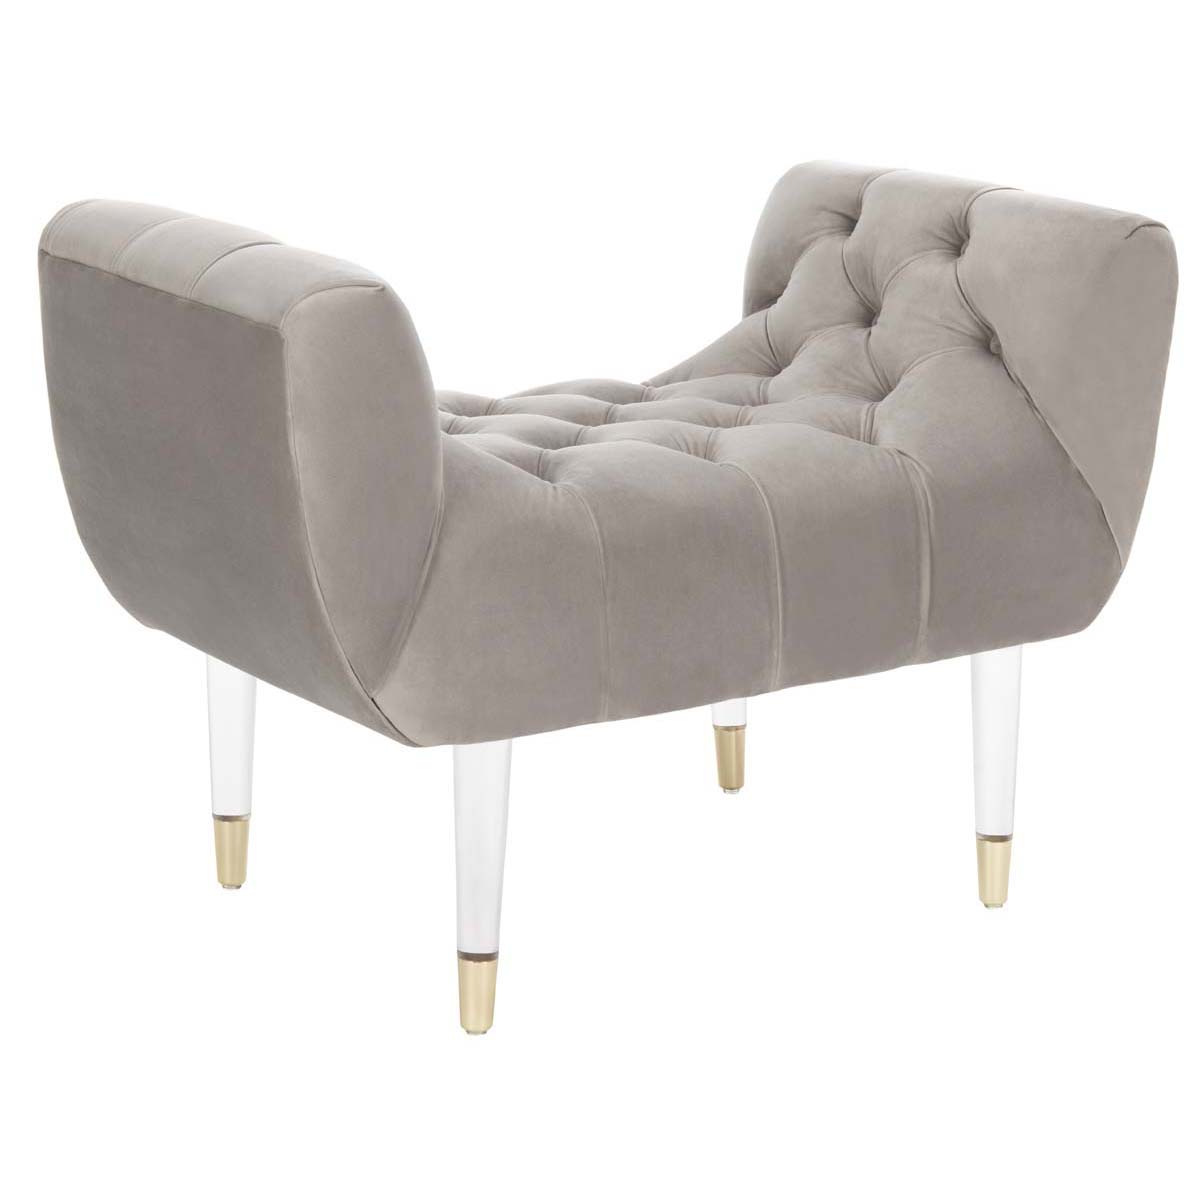 Safavieh Couture Eugenie Tufted Velvet Acrylic Bench - Pale Taupe